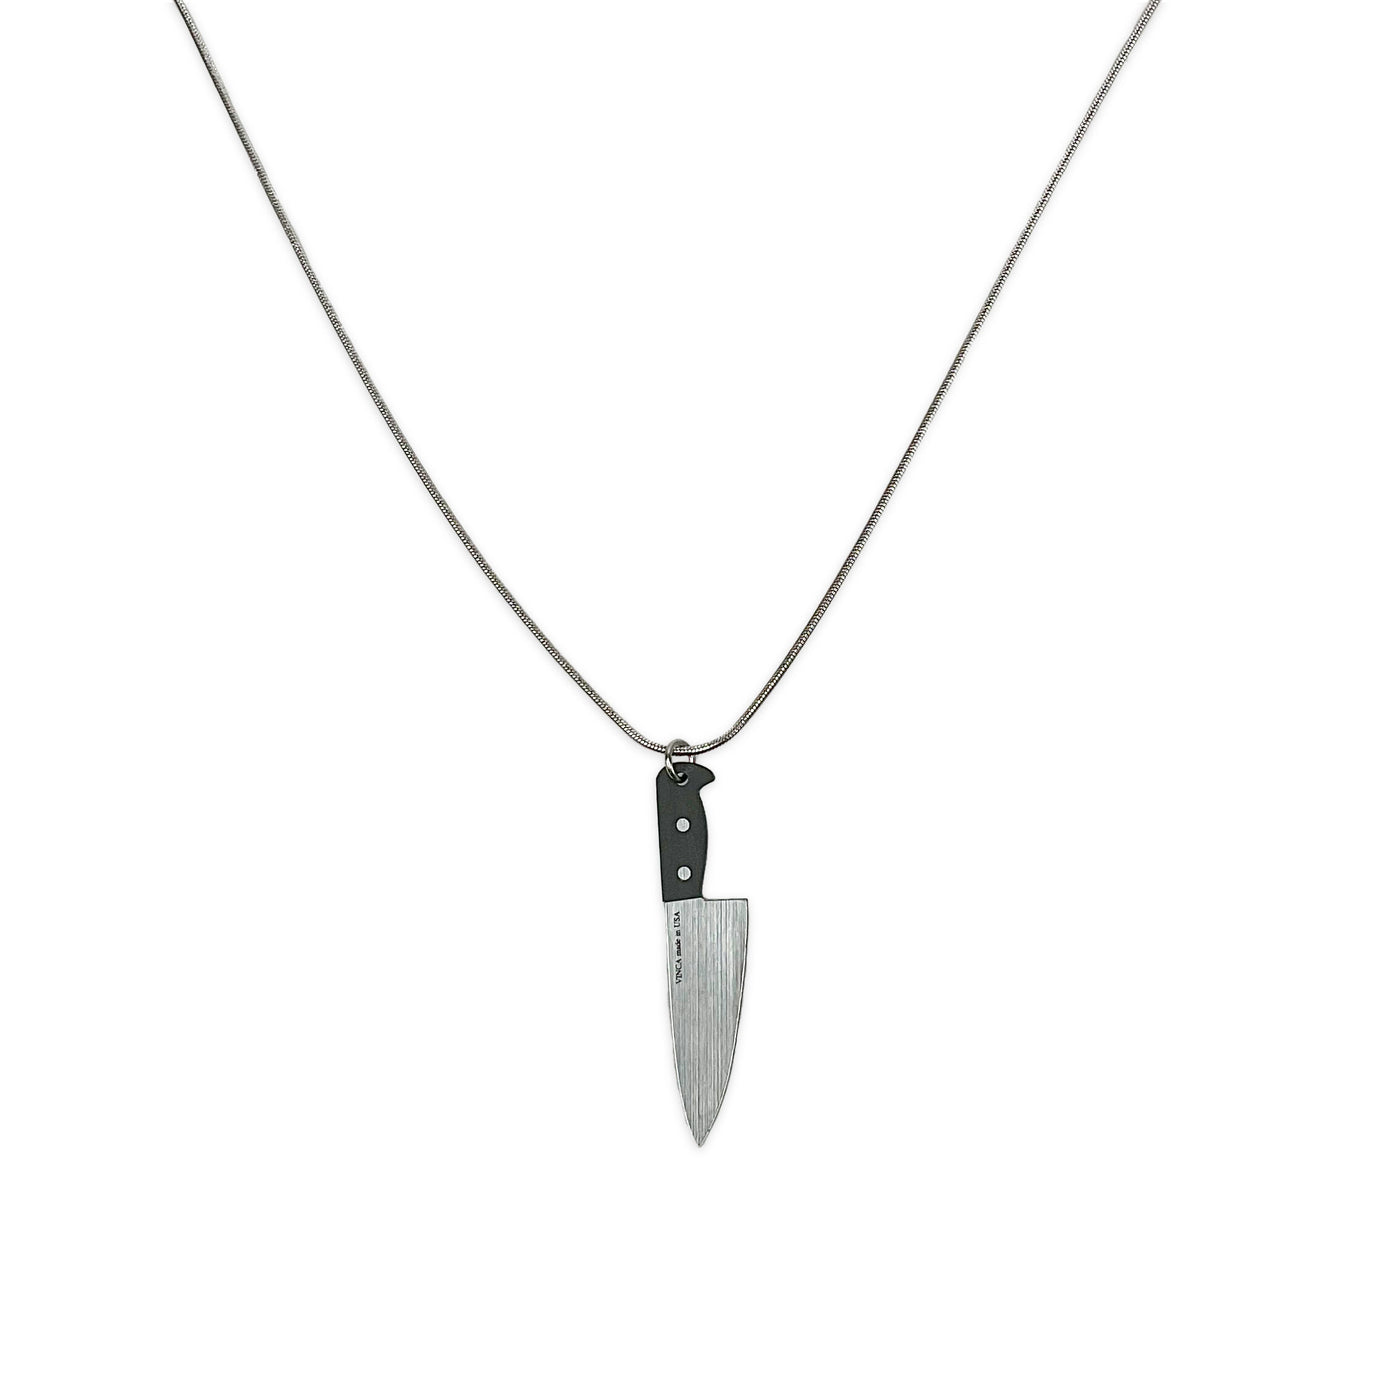 Chef's Knife Necklace in Silver/Black